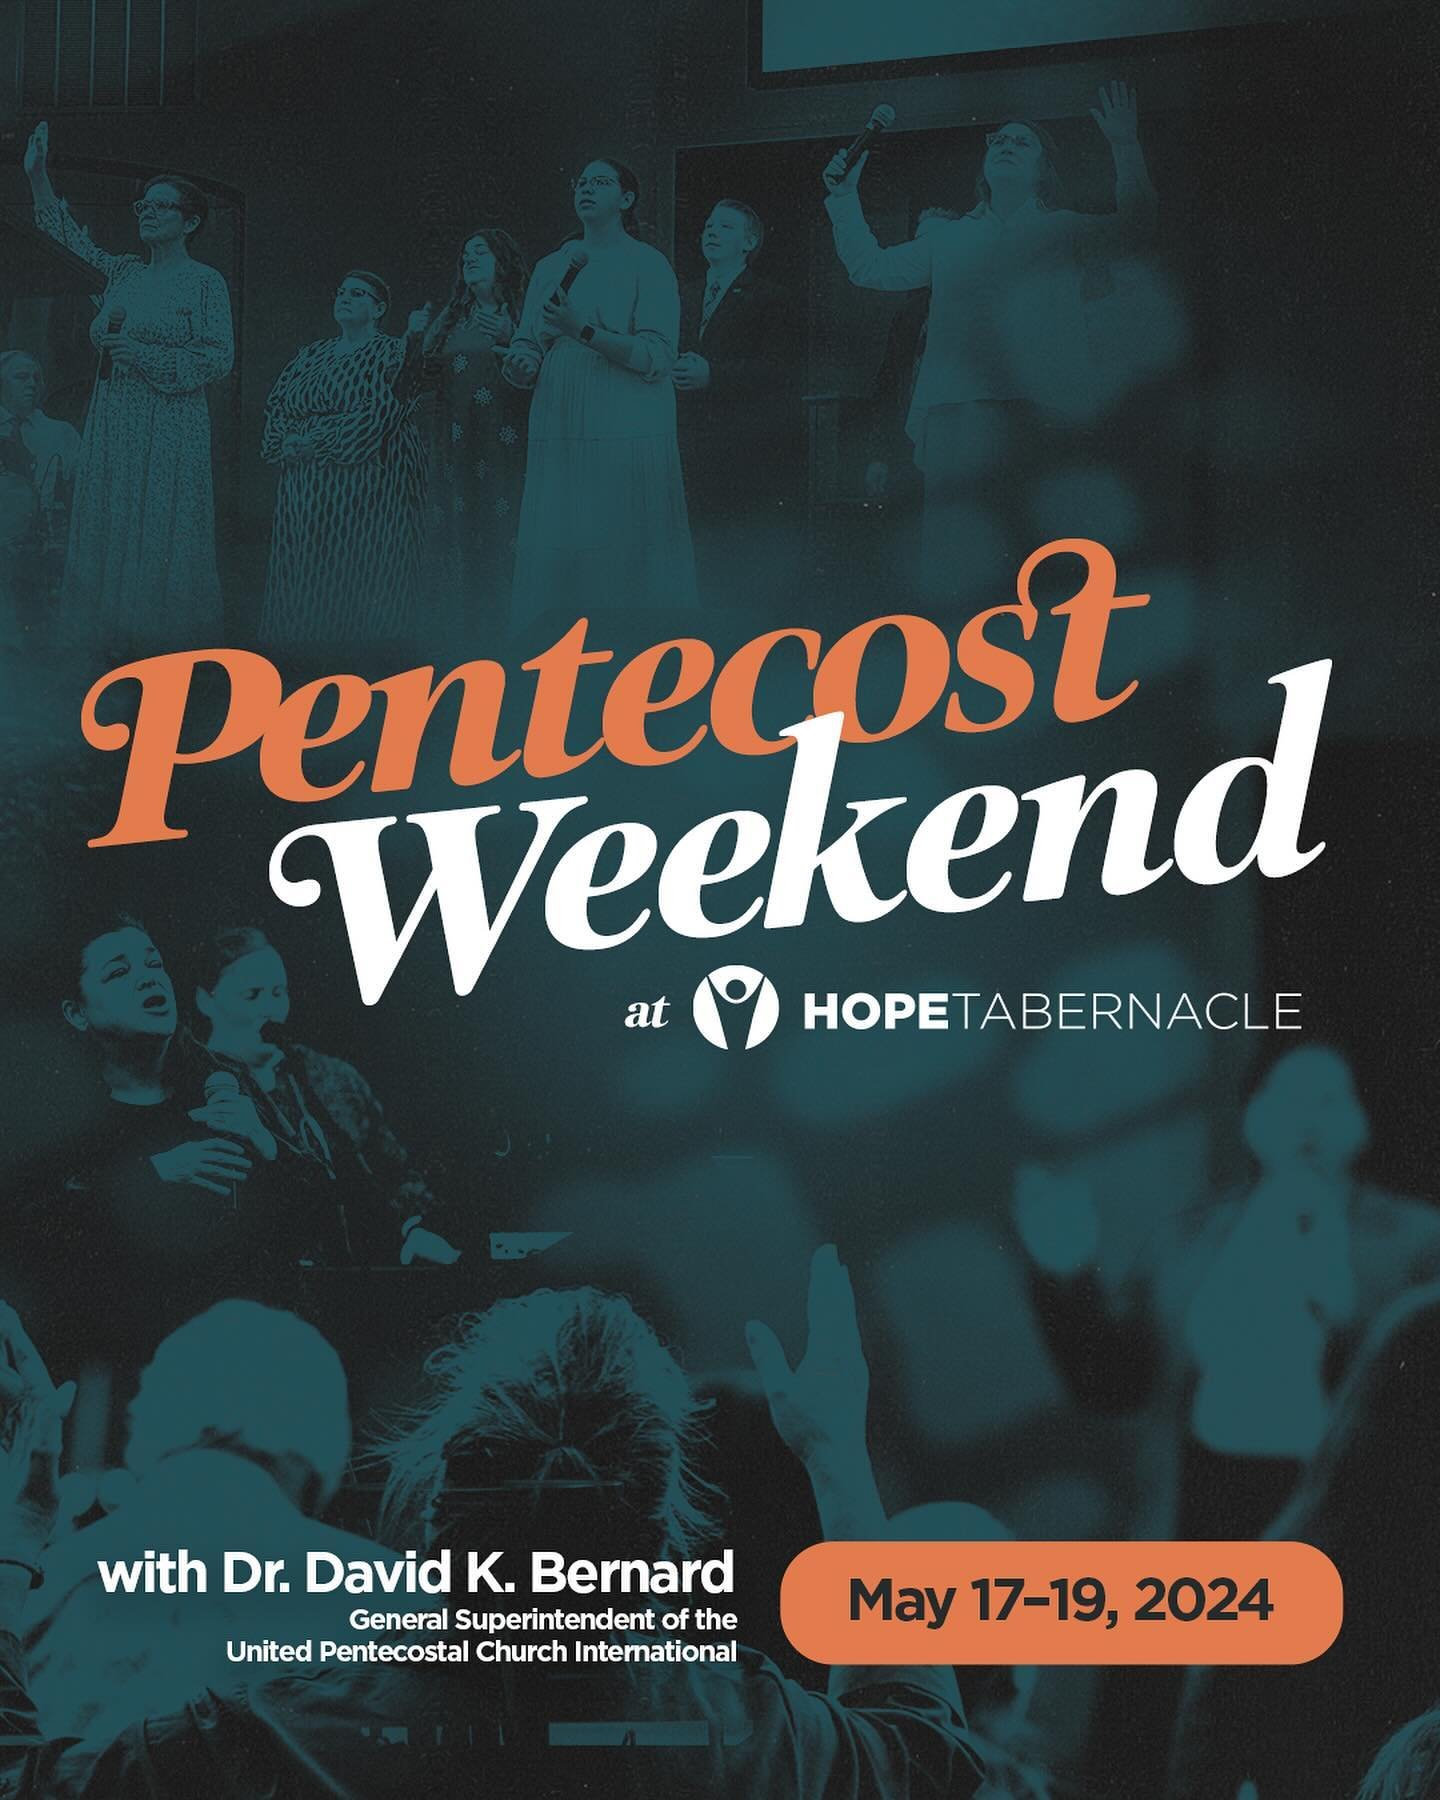 Want to learn more about Pentecost? Join us May 17th-19th for Pentecost Weekend with Dr. David K. Bernard.